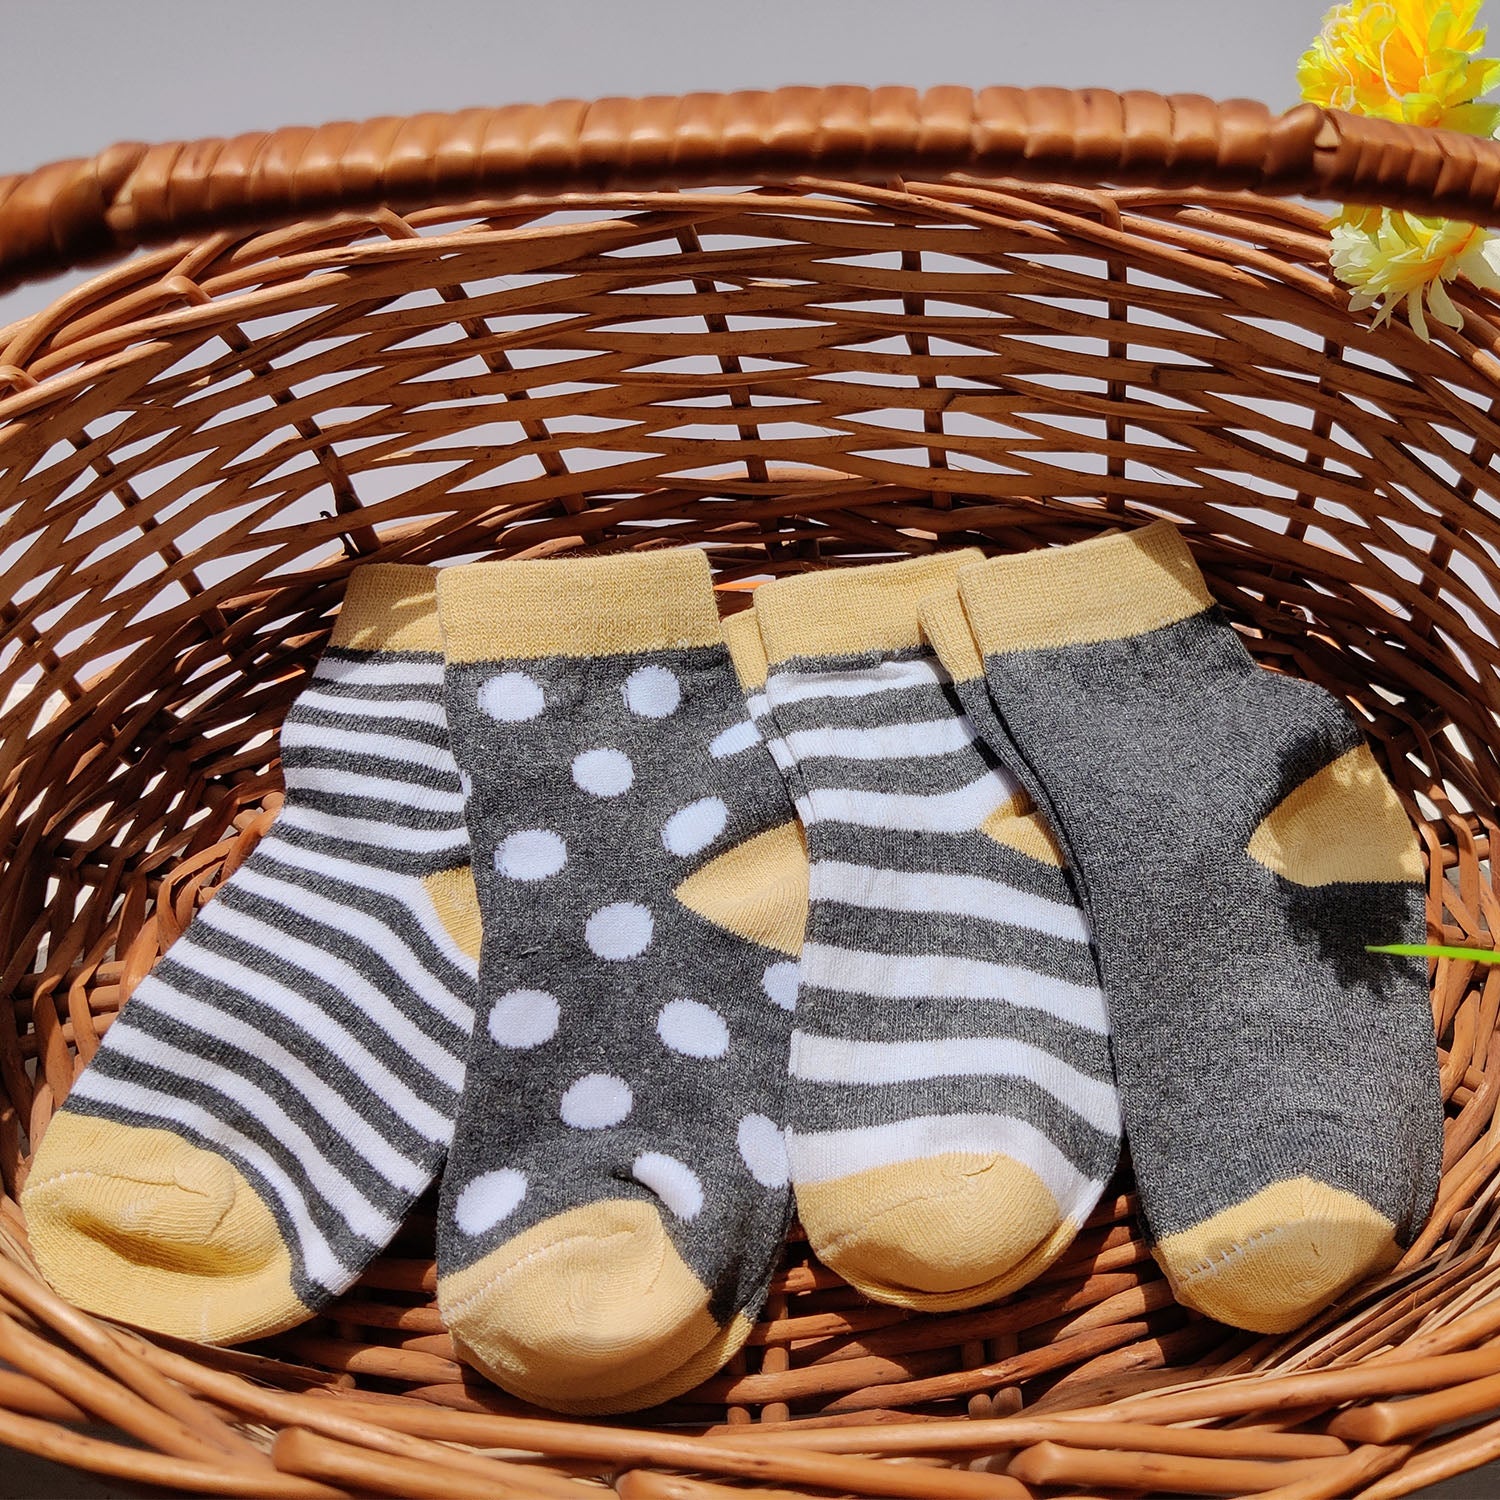 FOOTPRINTS Organic cotton Baby Socks -12-24Months - Pack of 4 Pairs